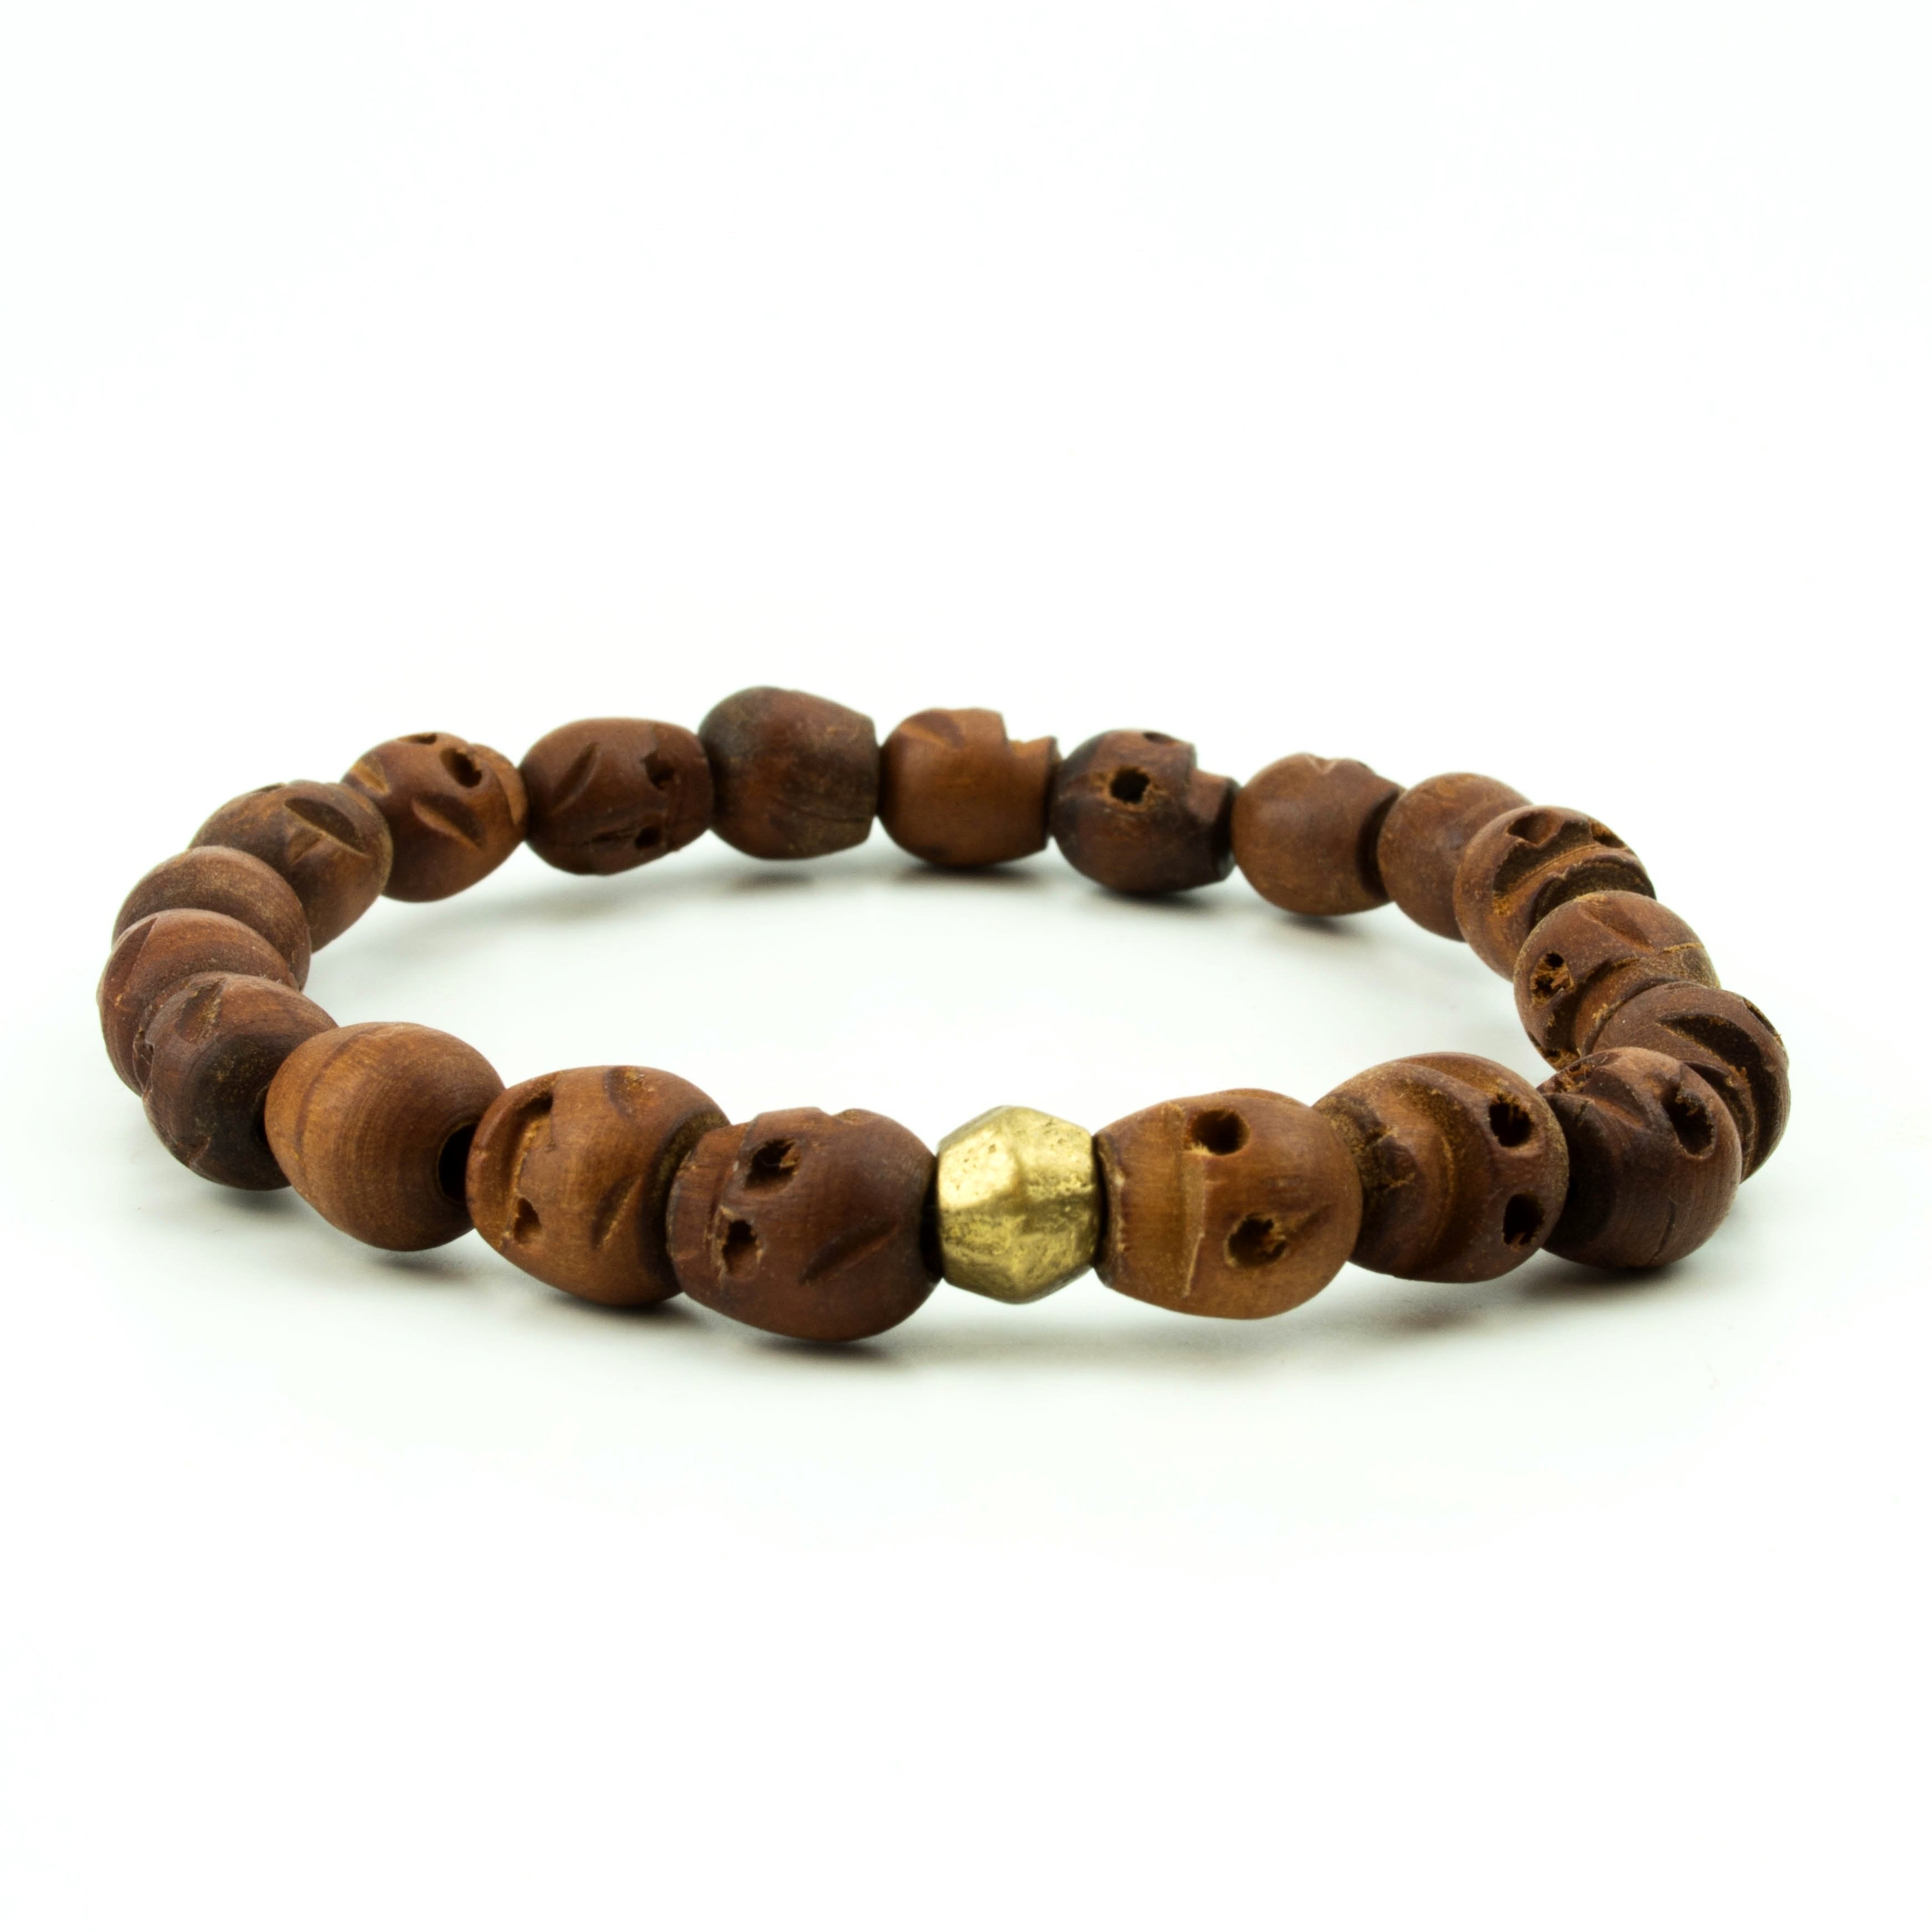 Skull and Wood Bead Bracelet 2 pack | AMiGAZ Attitude Approved Accessories